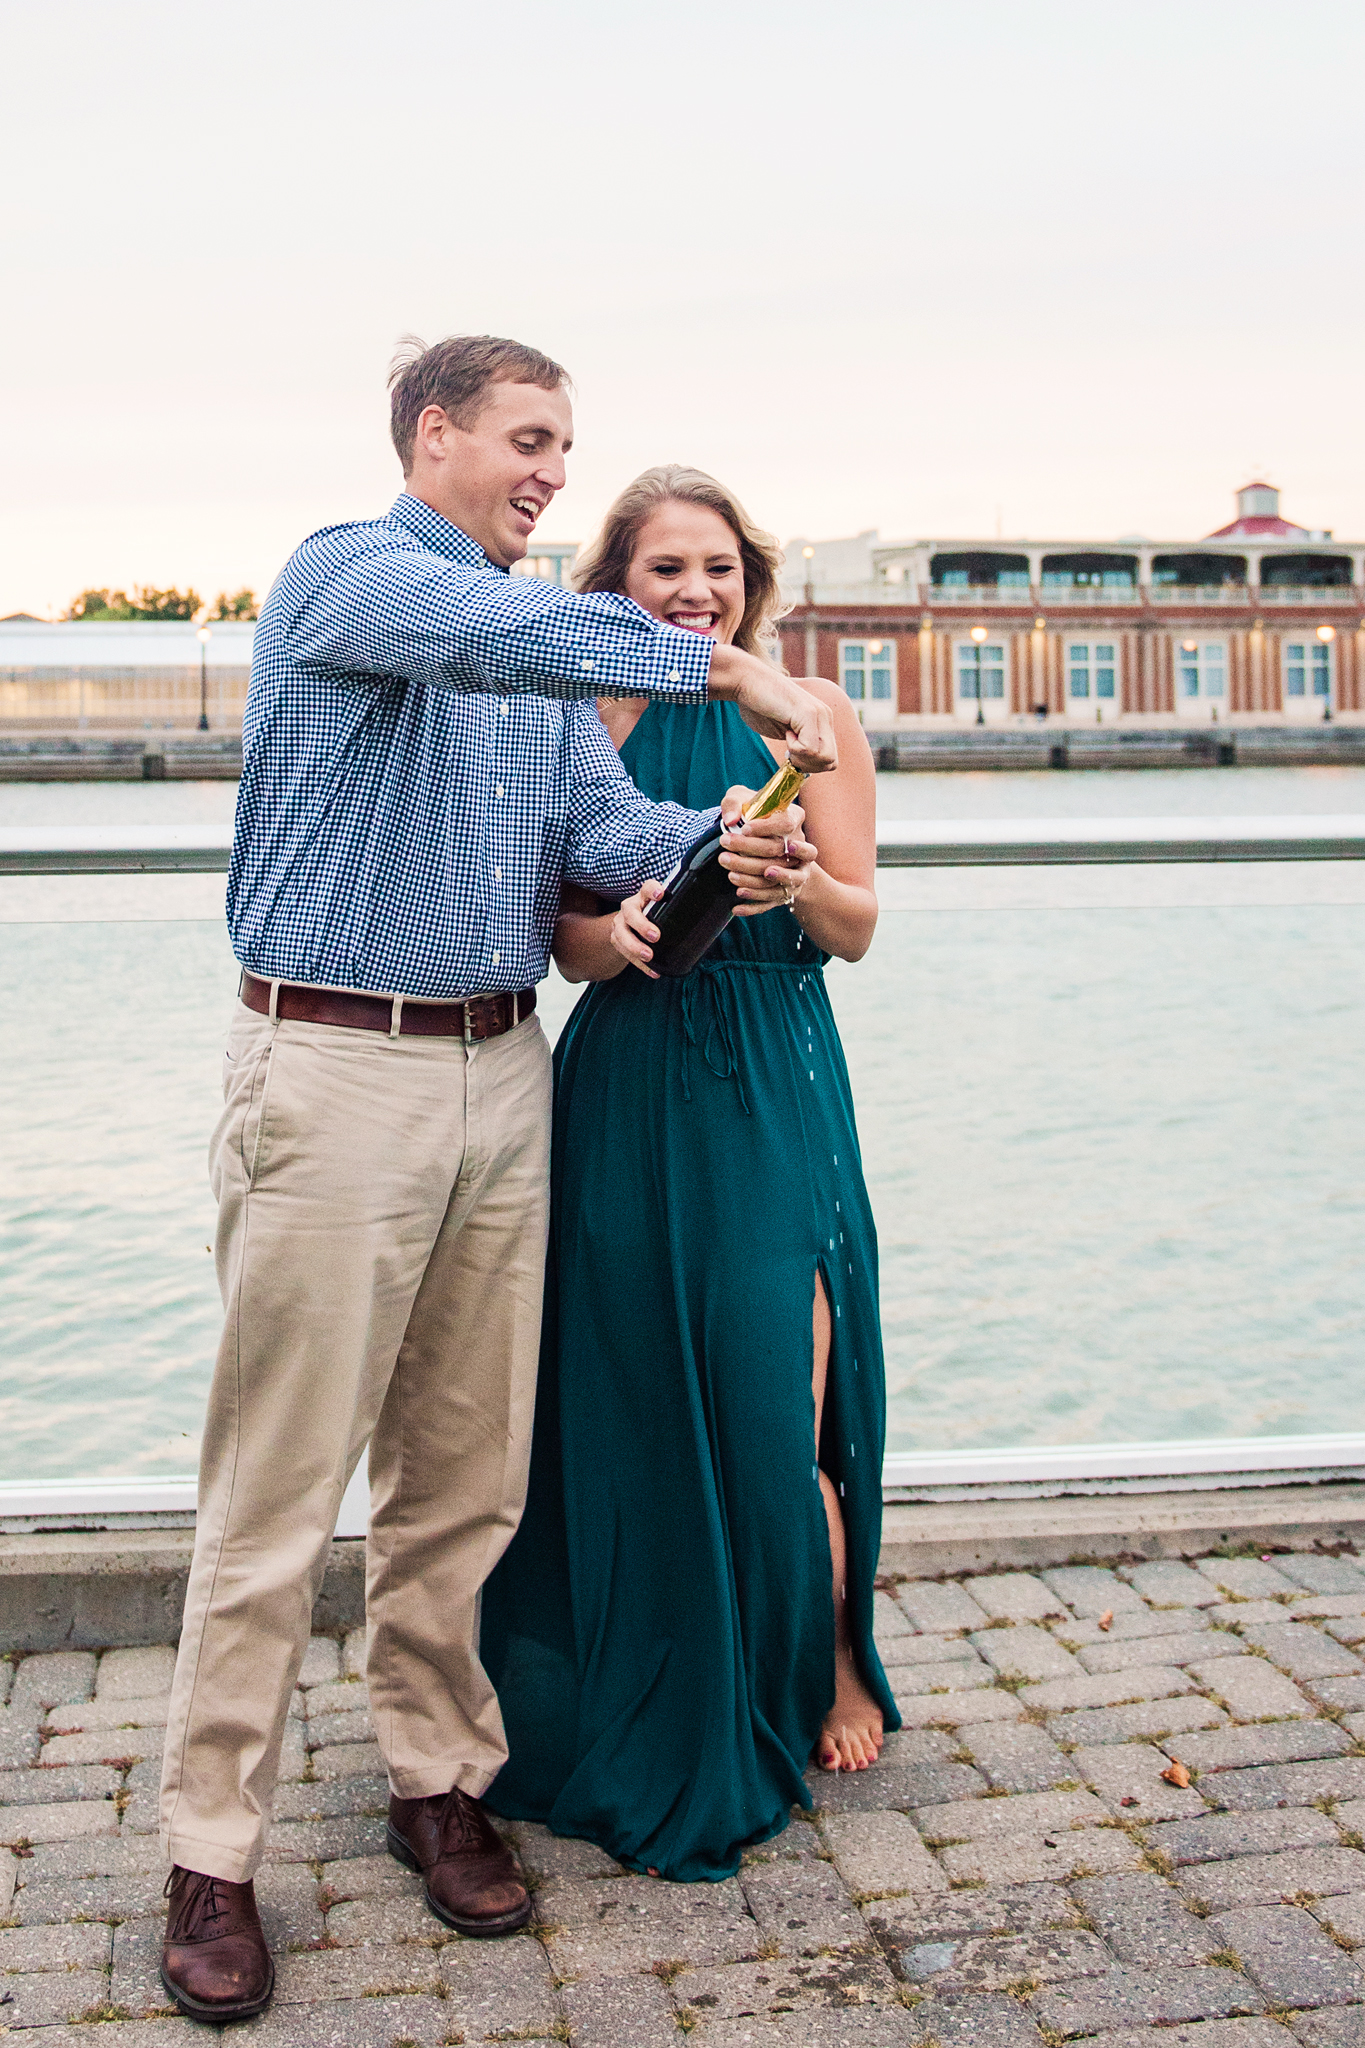 George_Eastman_House_Rochester_Yacht_Club_Rochester_Engagement_Session_JILL_STUDIO_Rochester_NY_Photographer_DSC_8283.jpg